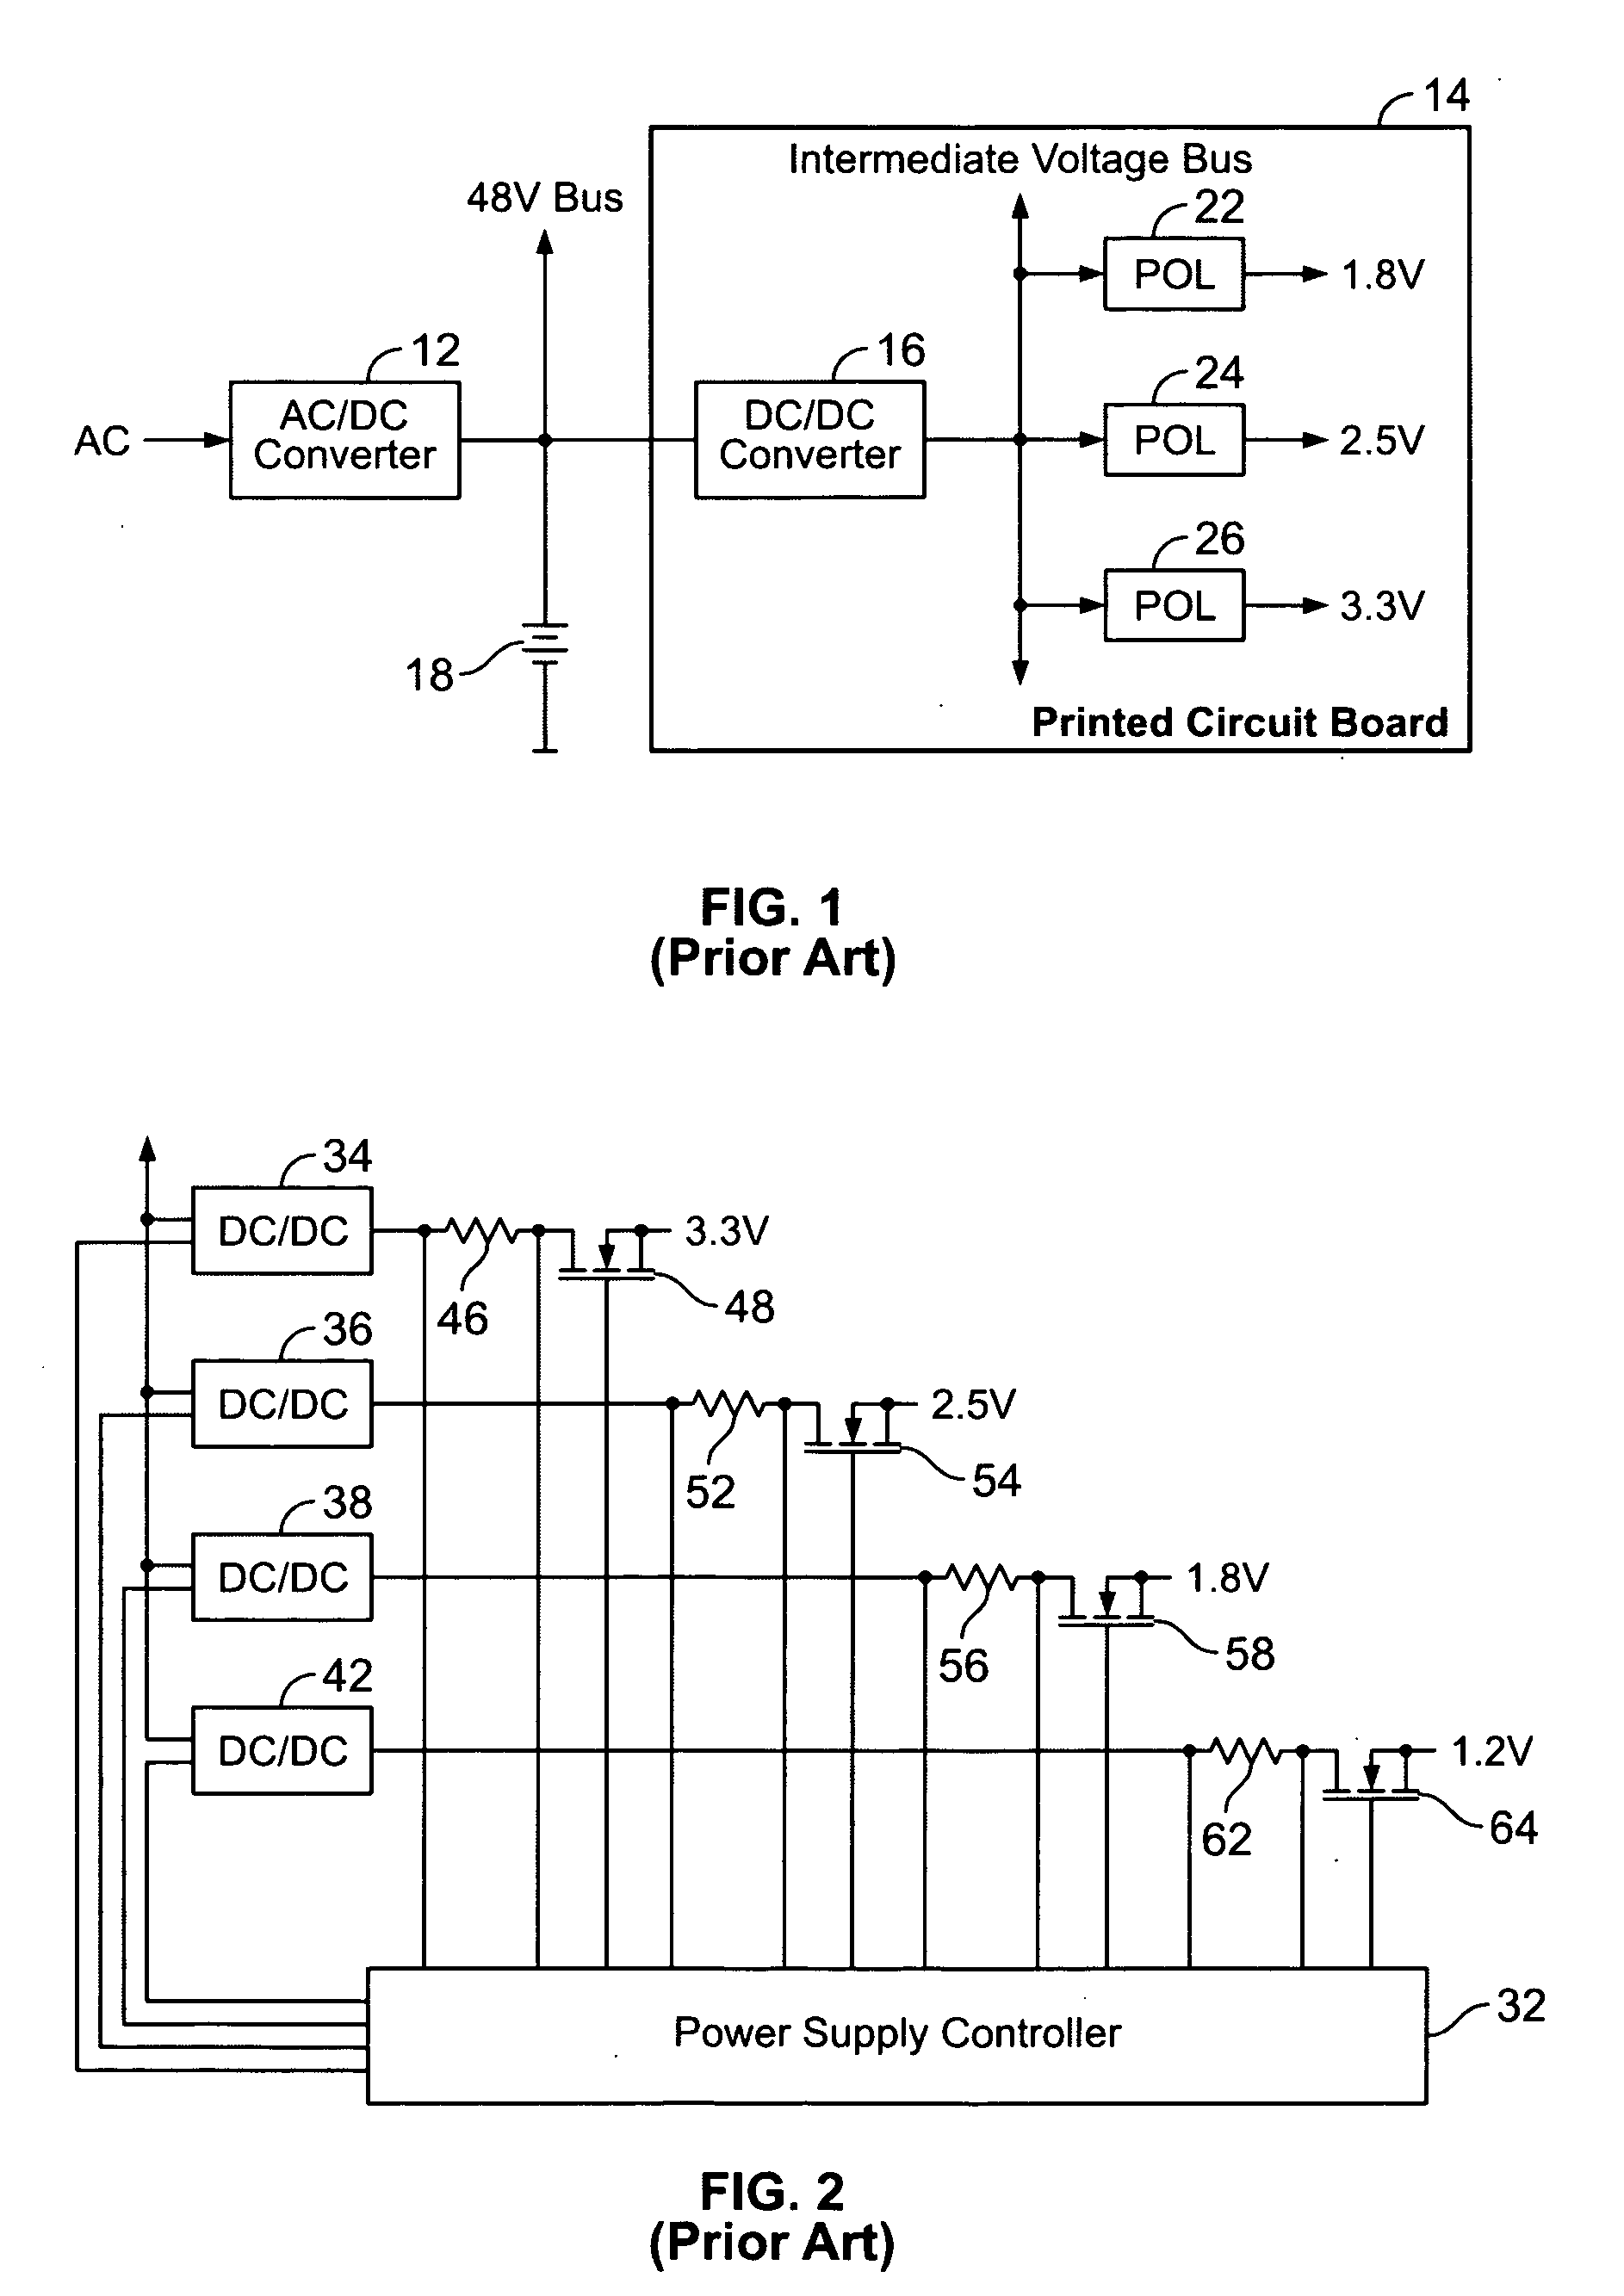 Method and system for controlling an array of point-of-load regulators and auxiliary devices